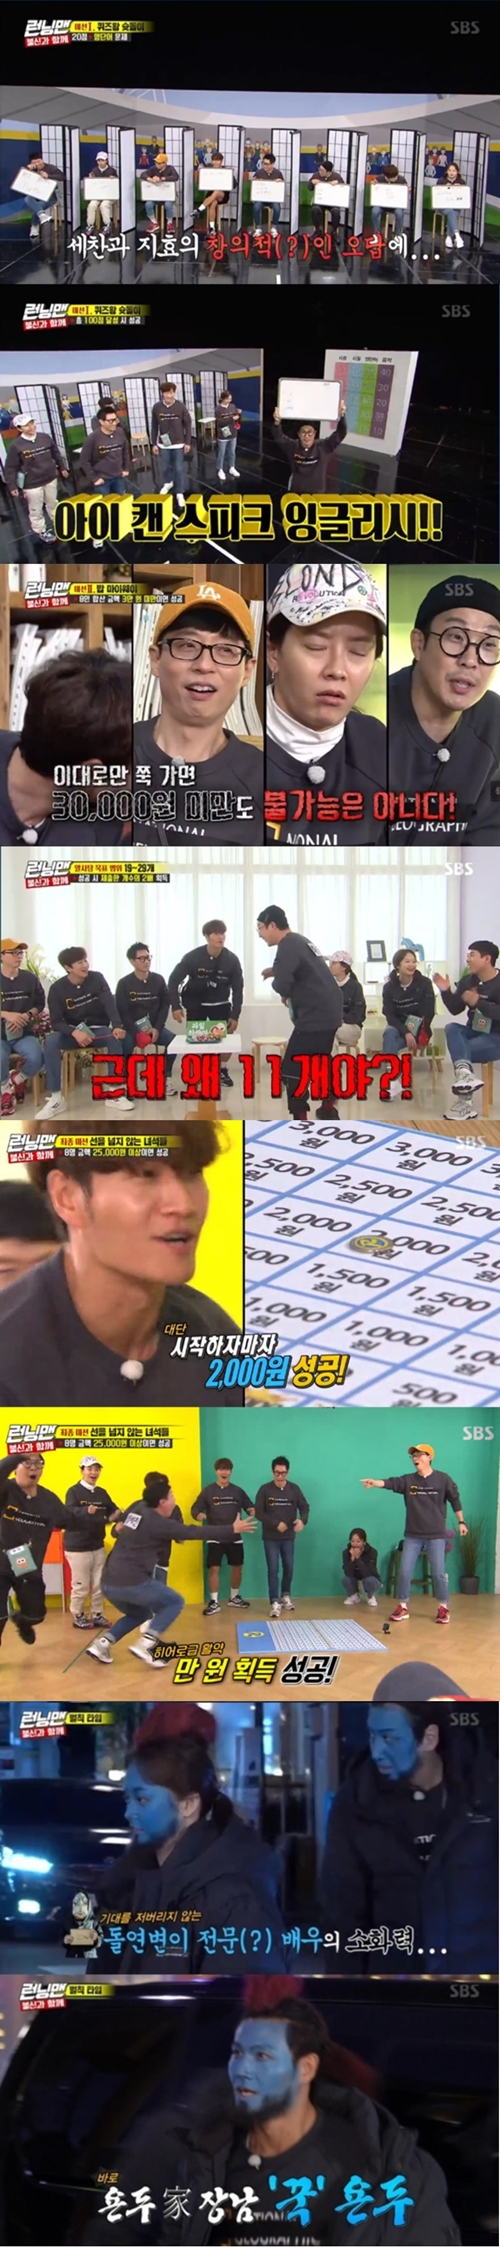 SBS Running Man kept the top spot in the same time zone of 2049 target TV viewer ratings.According to Nielsen Korea, a TV viewer rating research institute, Running Man, which was broadcast on the 1st, was ranked # 1 in the same time zone entertainment with 4.1% of 2049 target TV viewer ratings (based on the second part of the Seoul metropolitan area furniture TV viewer ratings), which is an important indicator of major advertising officials, surpassing Masked Wang and Donkey Ears.The average TV viewer ratings were 5.5% in the first part and 7.6% in the second part, while the highest TV viewer ratings per minute soared to 8.4%.The broadcast was featured in a special united race with distrust, which was set up for members who had been suspicious and fraught in the past few weeks.In the first mission, The King of Quiz he had to unanimously answer the correct answer: all kinds of fouls and Jeon So-mins wrong answers came out, but all the correct answers came out.In the second mission Bob My Way, Jeon So-min was prominent.One of the eight different menus with different prices was private, and if the sum was less than 30,000 won, it was a power pass.With Ji Suk-jin opting for a high-priced soy sauce, Jeon So-min chose a boiled egg and all the members ate well.On the other hand, the third mission Category Answer that succeeded when all the people said the category presented in 8 seconds failed, and once again the distrust of the members raised their heads and laughed.Fortunately, in the final mission The Guys who do not cross the line, Yang Se-chan won the 10,000 won in his performance and got a good feeling.Yang Se-chan won the penalty exemption by ranking first by member, and the penalty was confirmed when Jeon So-min and Lee Kwang-soo were ranked 7th and 8th.The penalists Jeon So-min and Lee Kwang-soo had to sell Bungeo-pang on the street with the Running Man-pyo Megahit makeup Yondu makeup, and pointed out Kim Jong-kook as additional penalties.The three humiliation sales sites rose to 8.4% of the highest TV viewer ratings per minute, accounting for the best one minute.